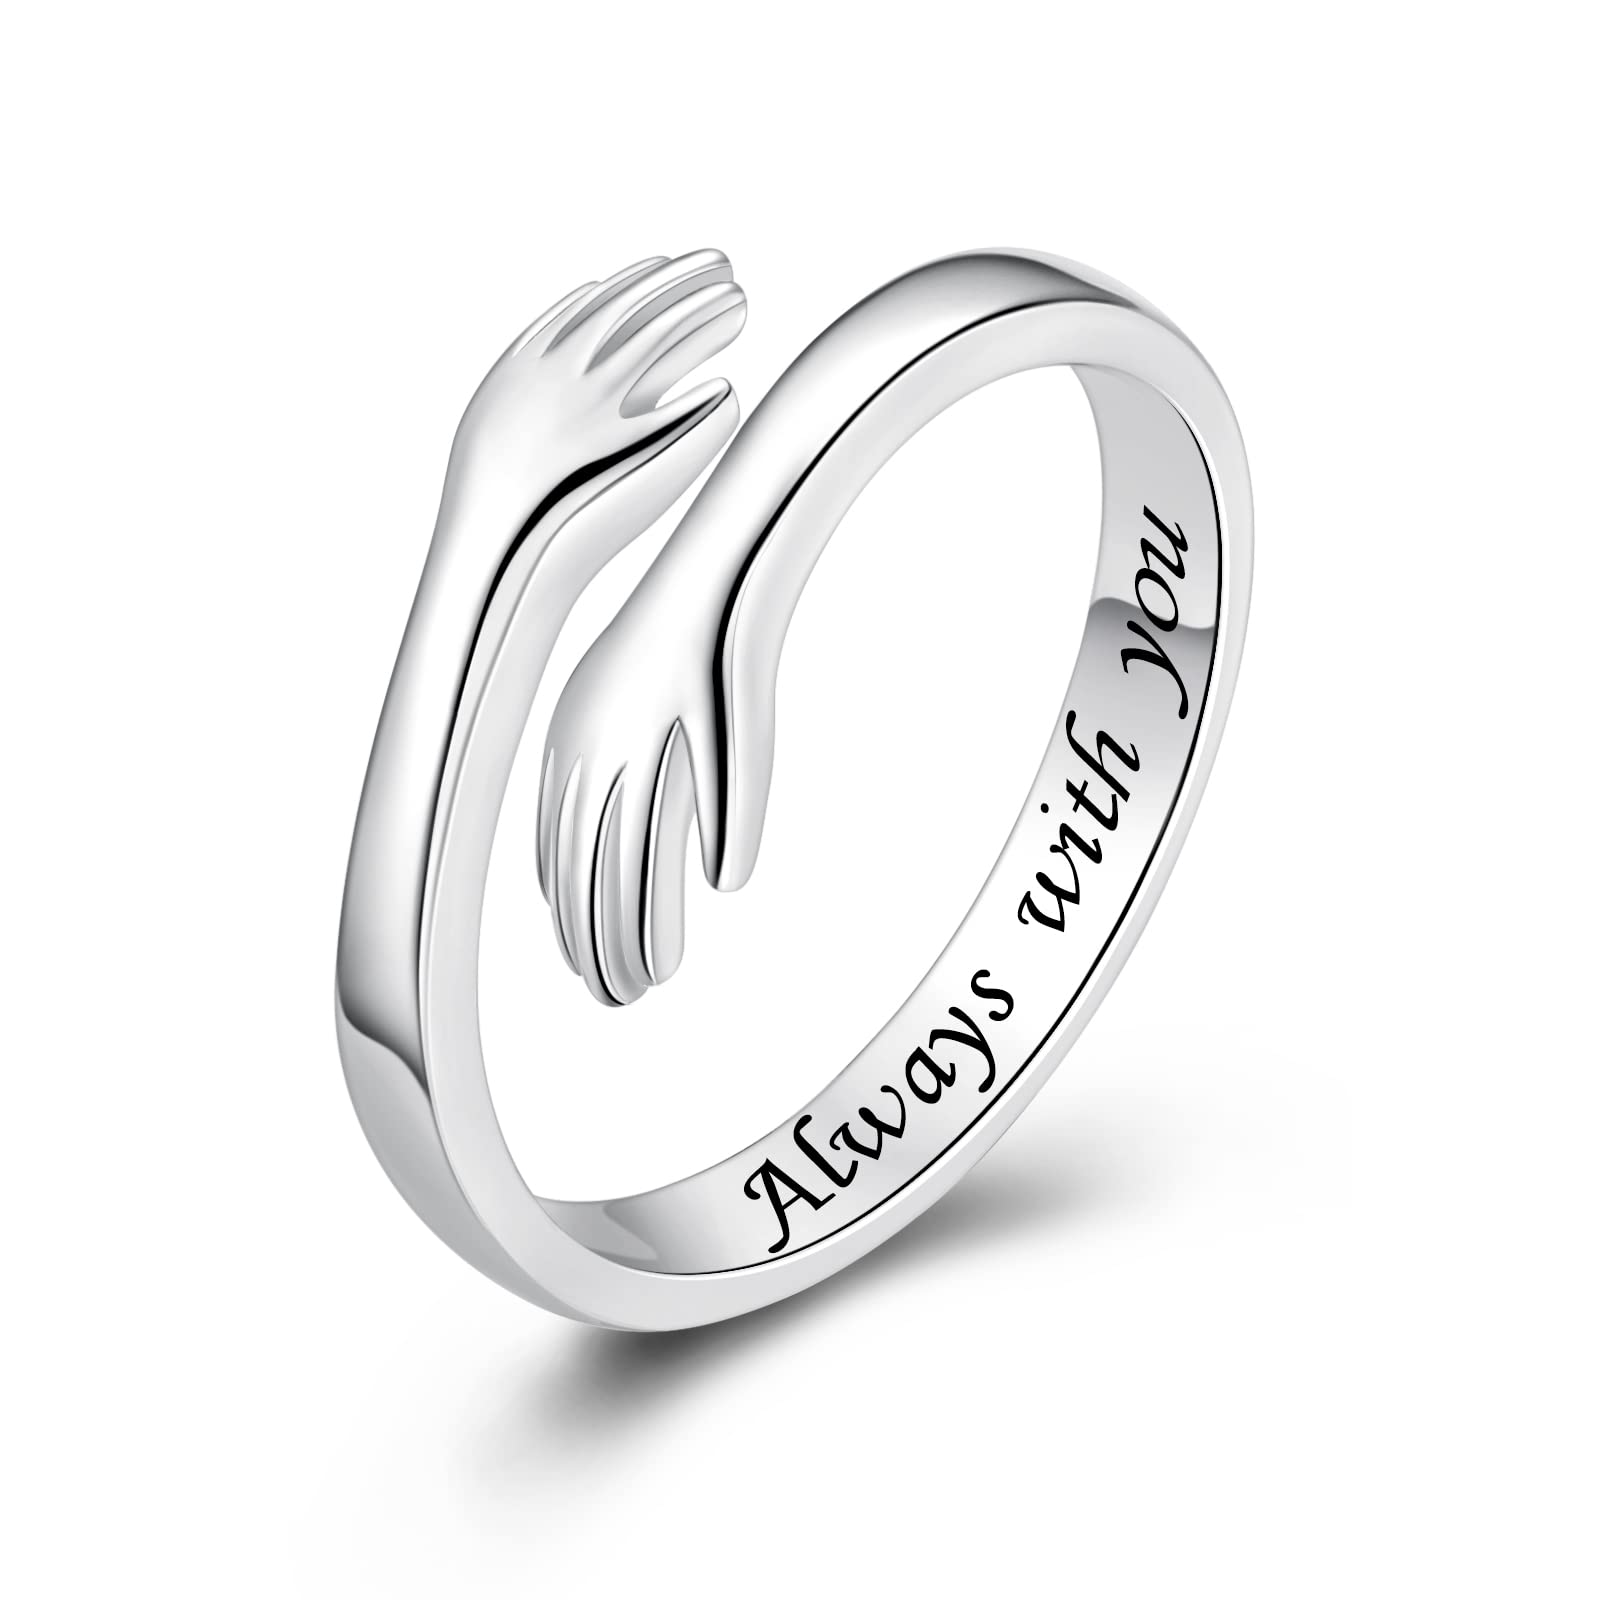 Adjustable Hug Ring for Women with Free Engraved Words